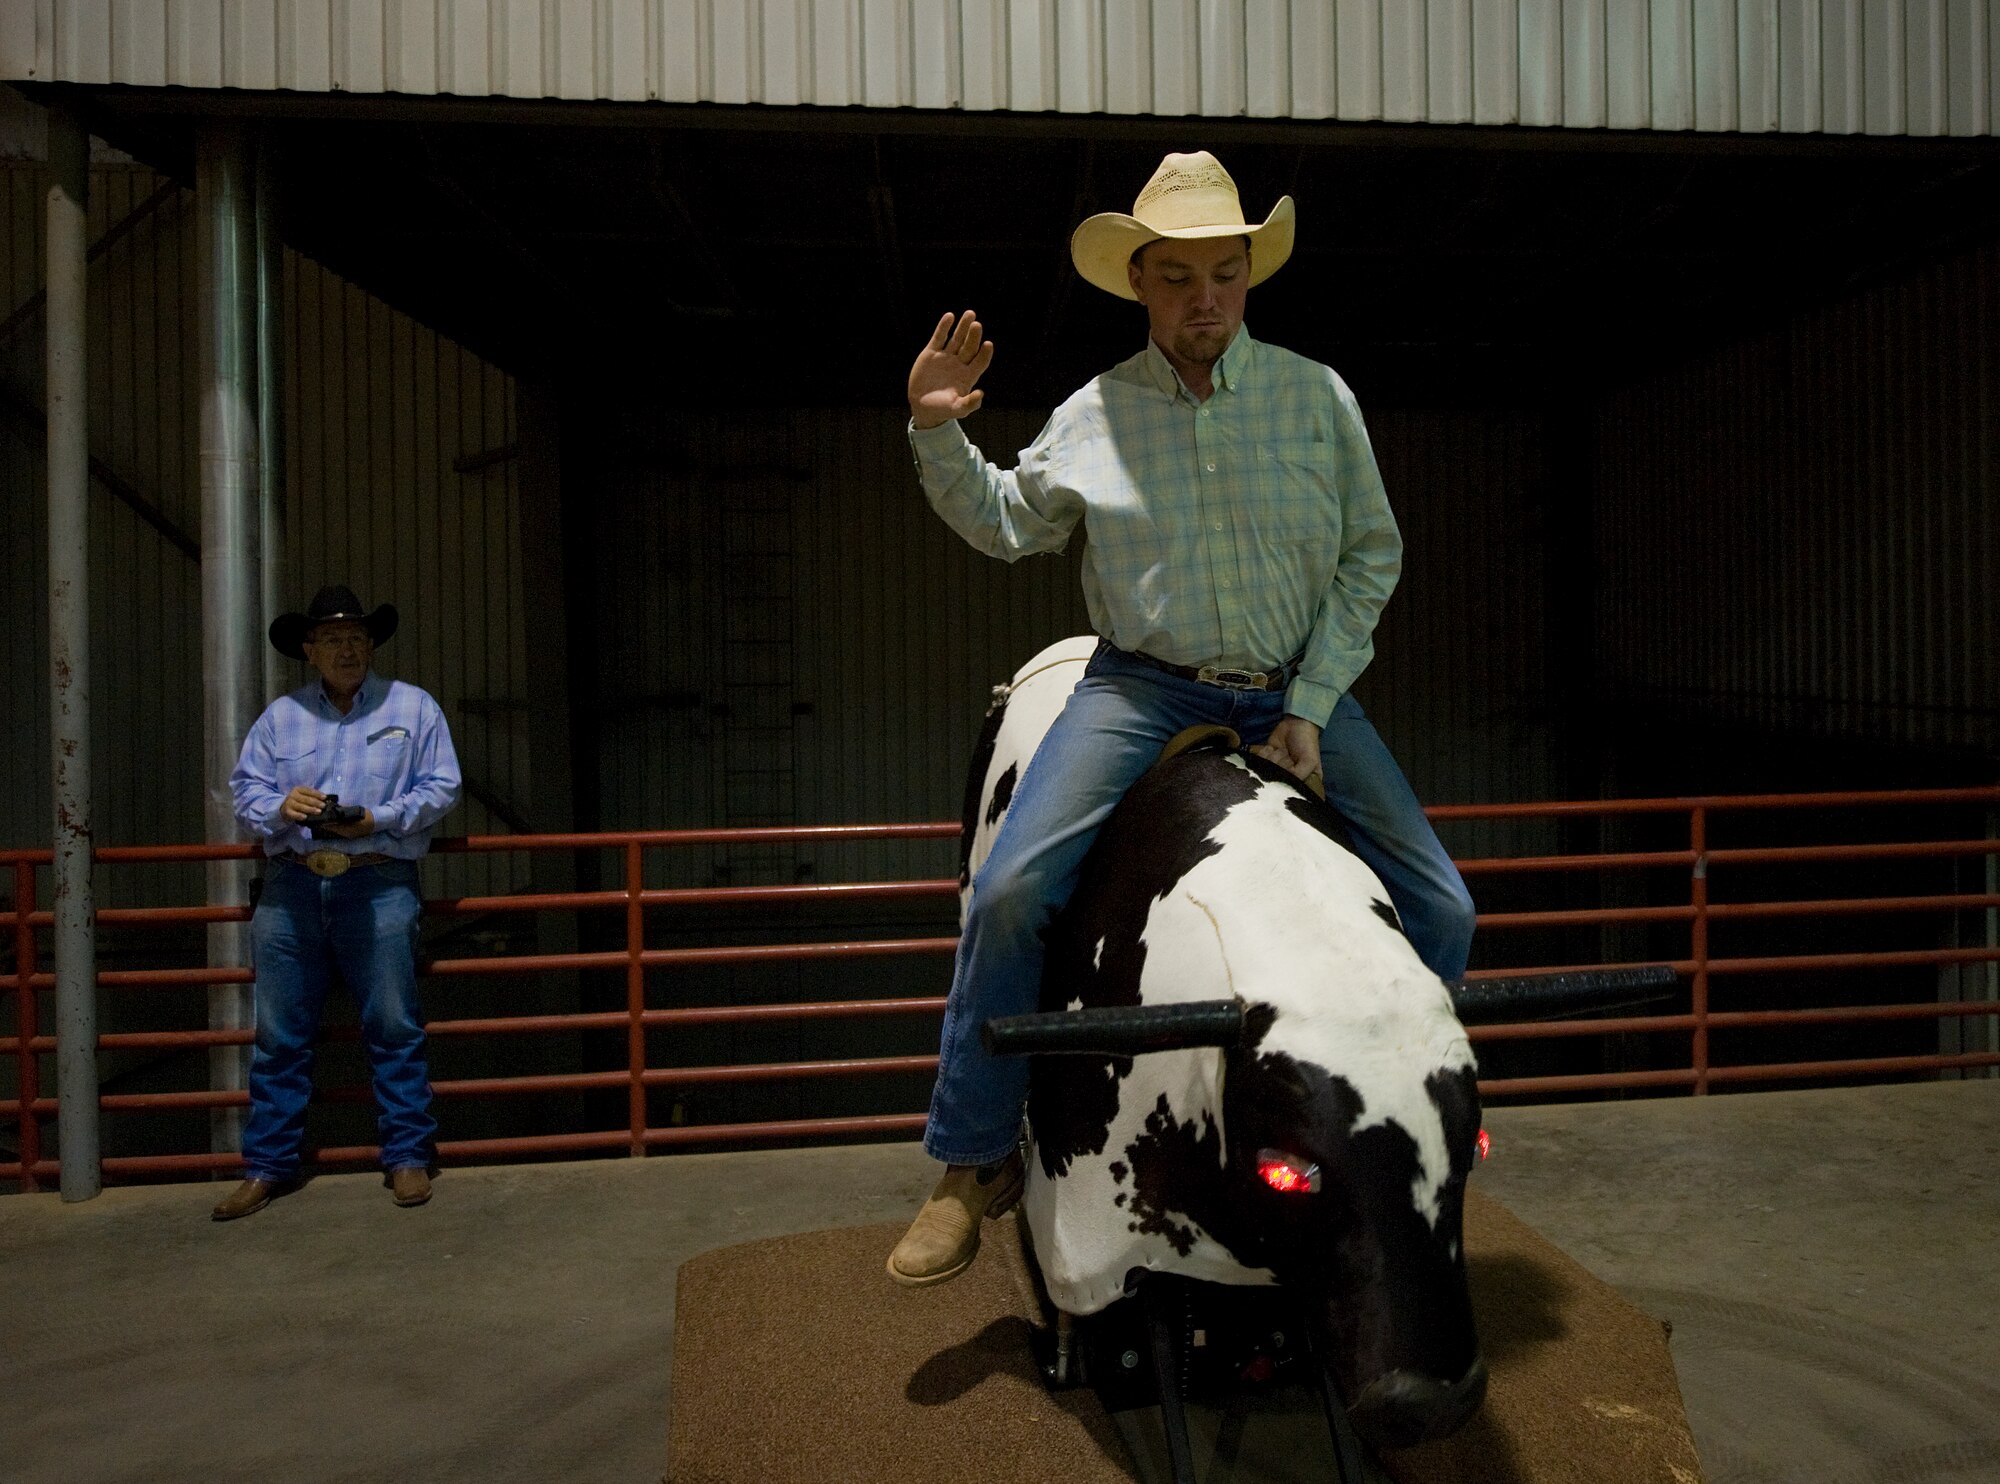 Master Sgt. R.J. Eppers practices for the bull riding competition using Robo Bull a remote controlled bull riding simulator at the Professional Armed Forces Rodeo Associations World Finals Nov. 20, 2010, in Glen Rose, Texas. (U.S. Air Force photo/Tech. Sgt. Bennie J. Davis III)